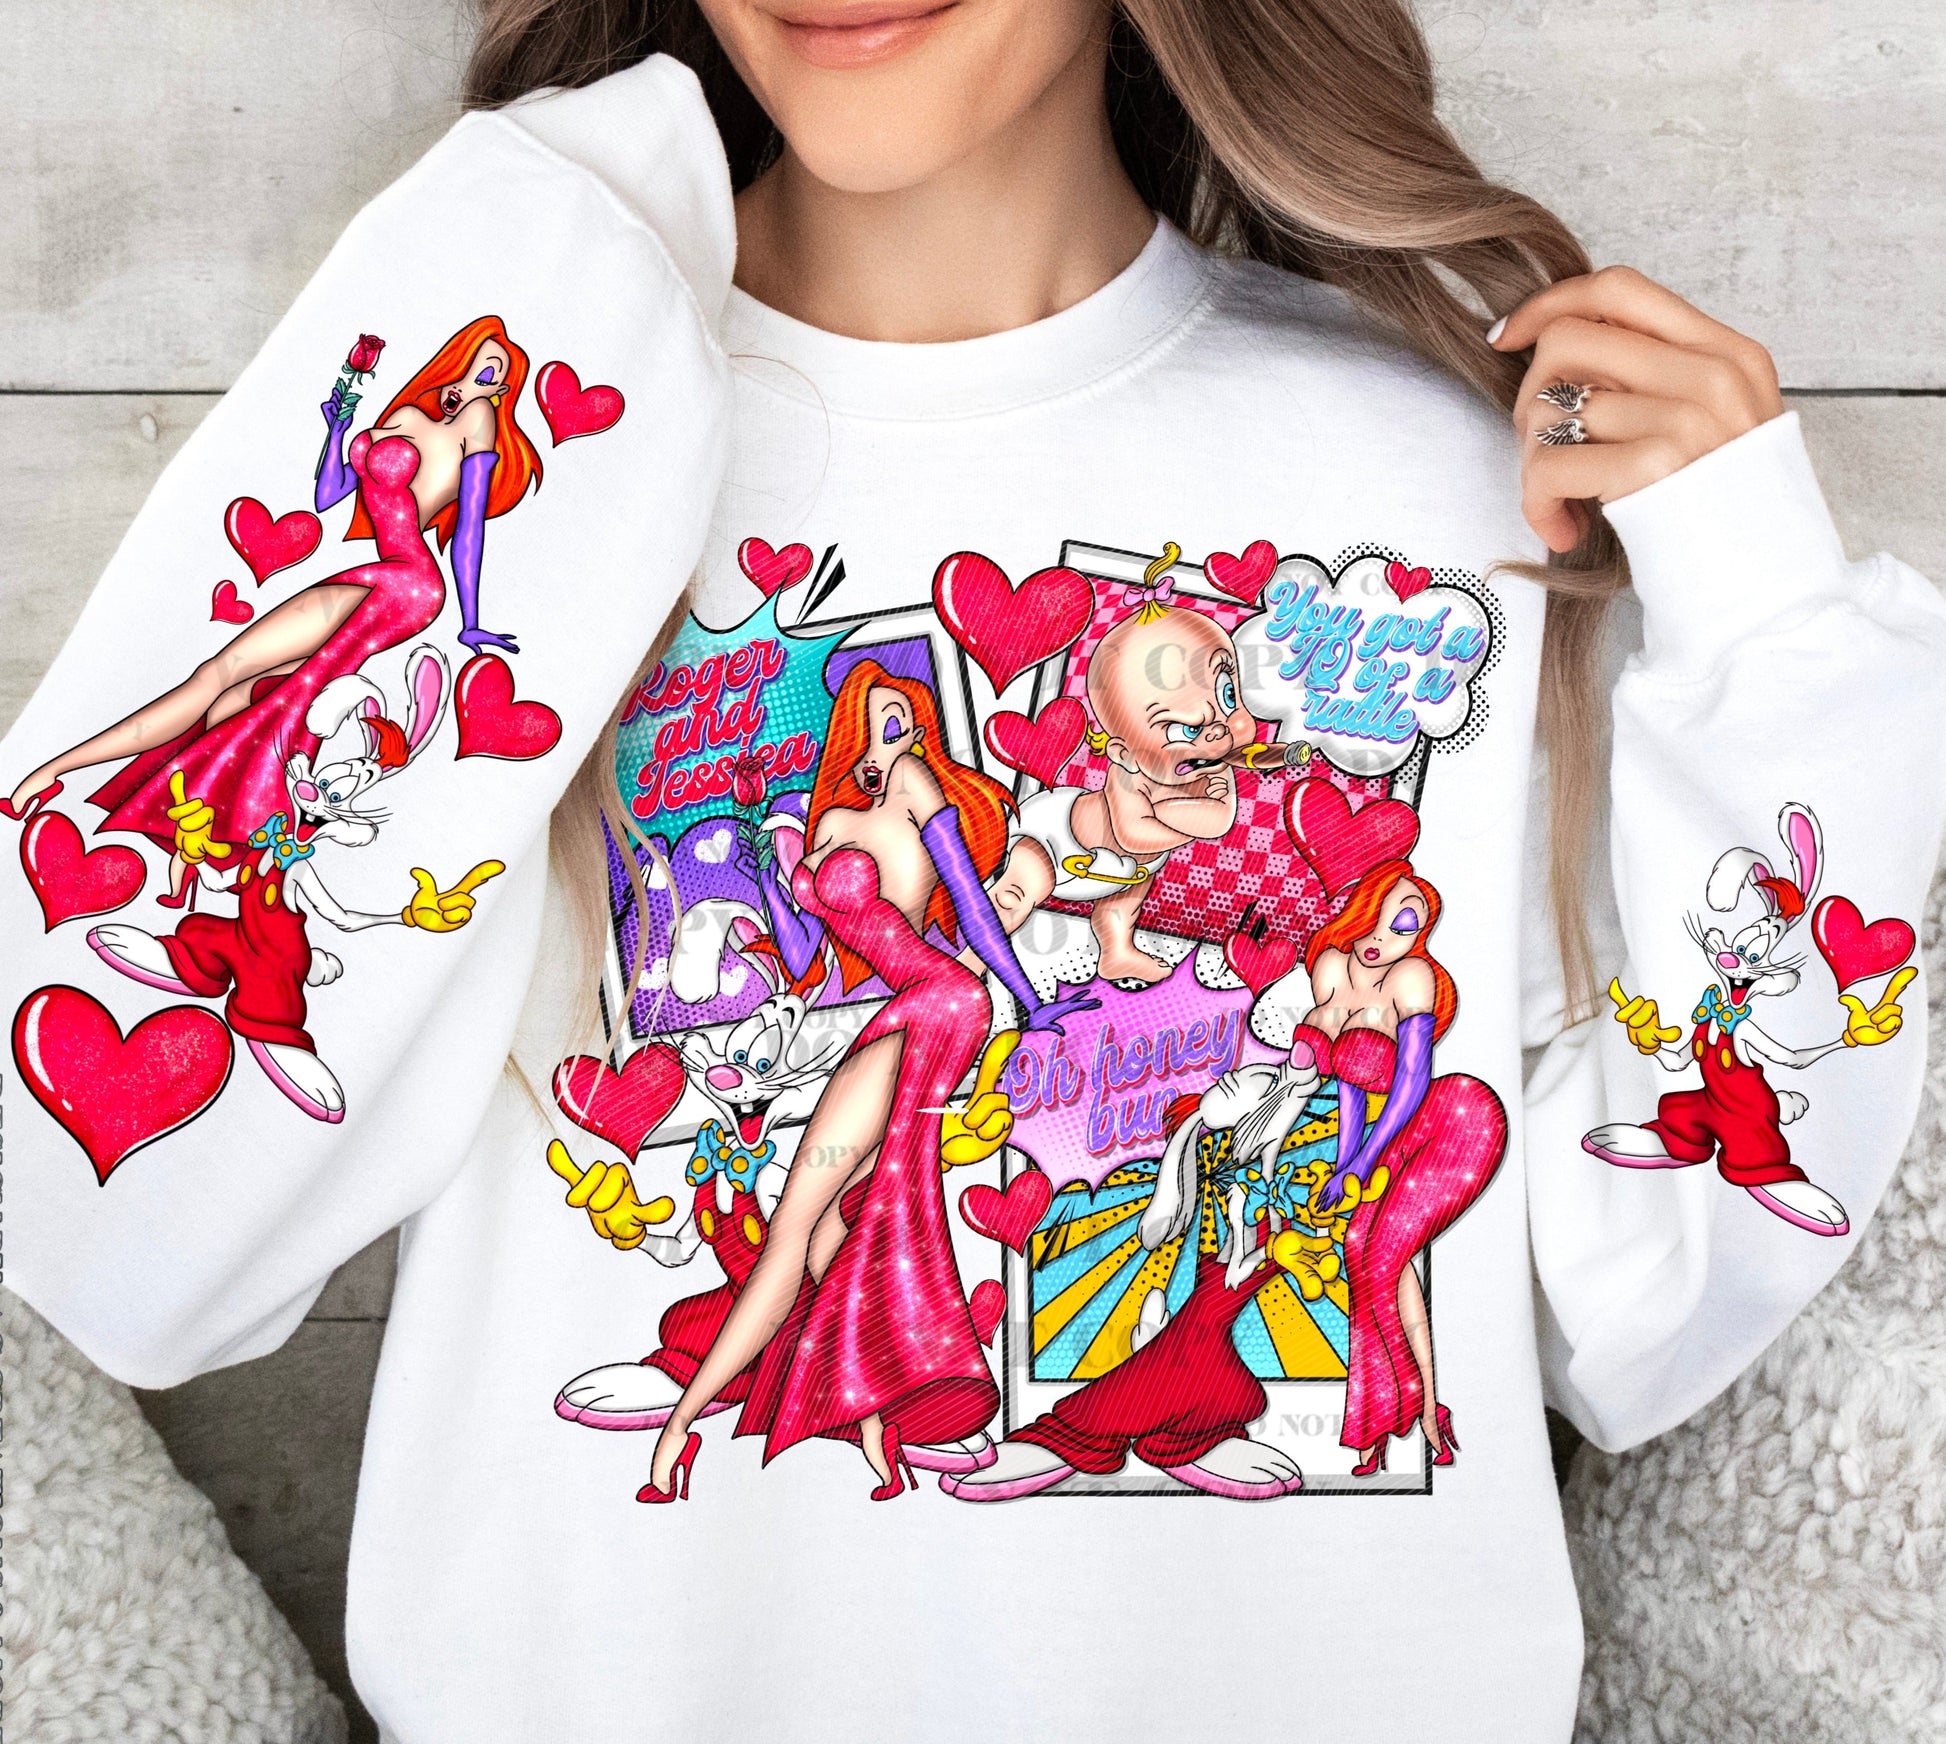 a woman wearing a white shirt with cartoon characters on it